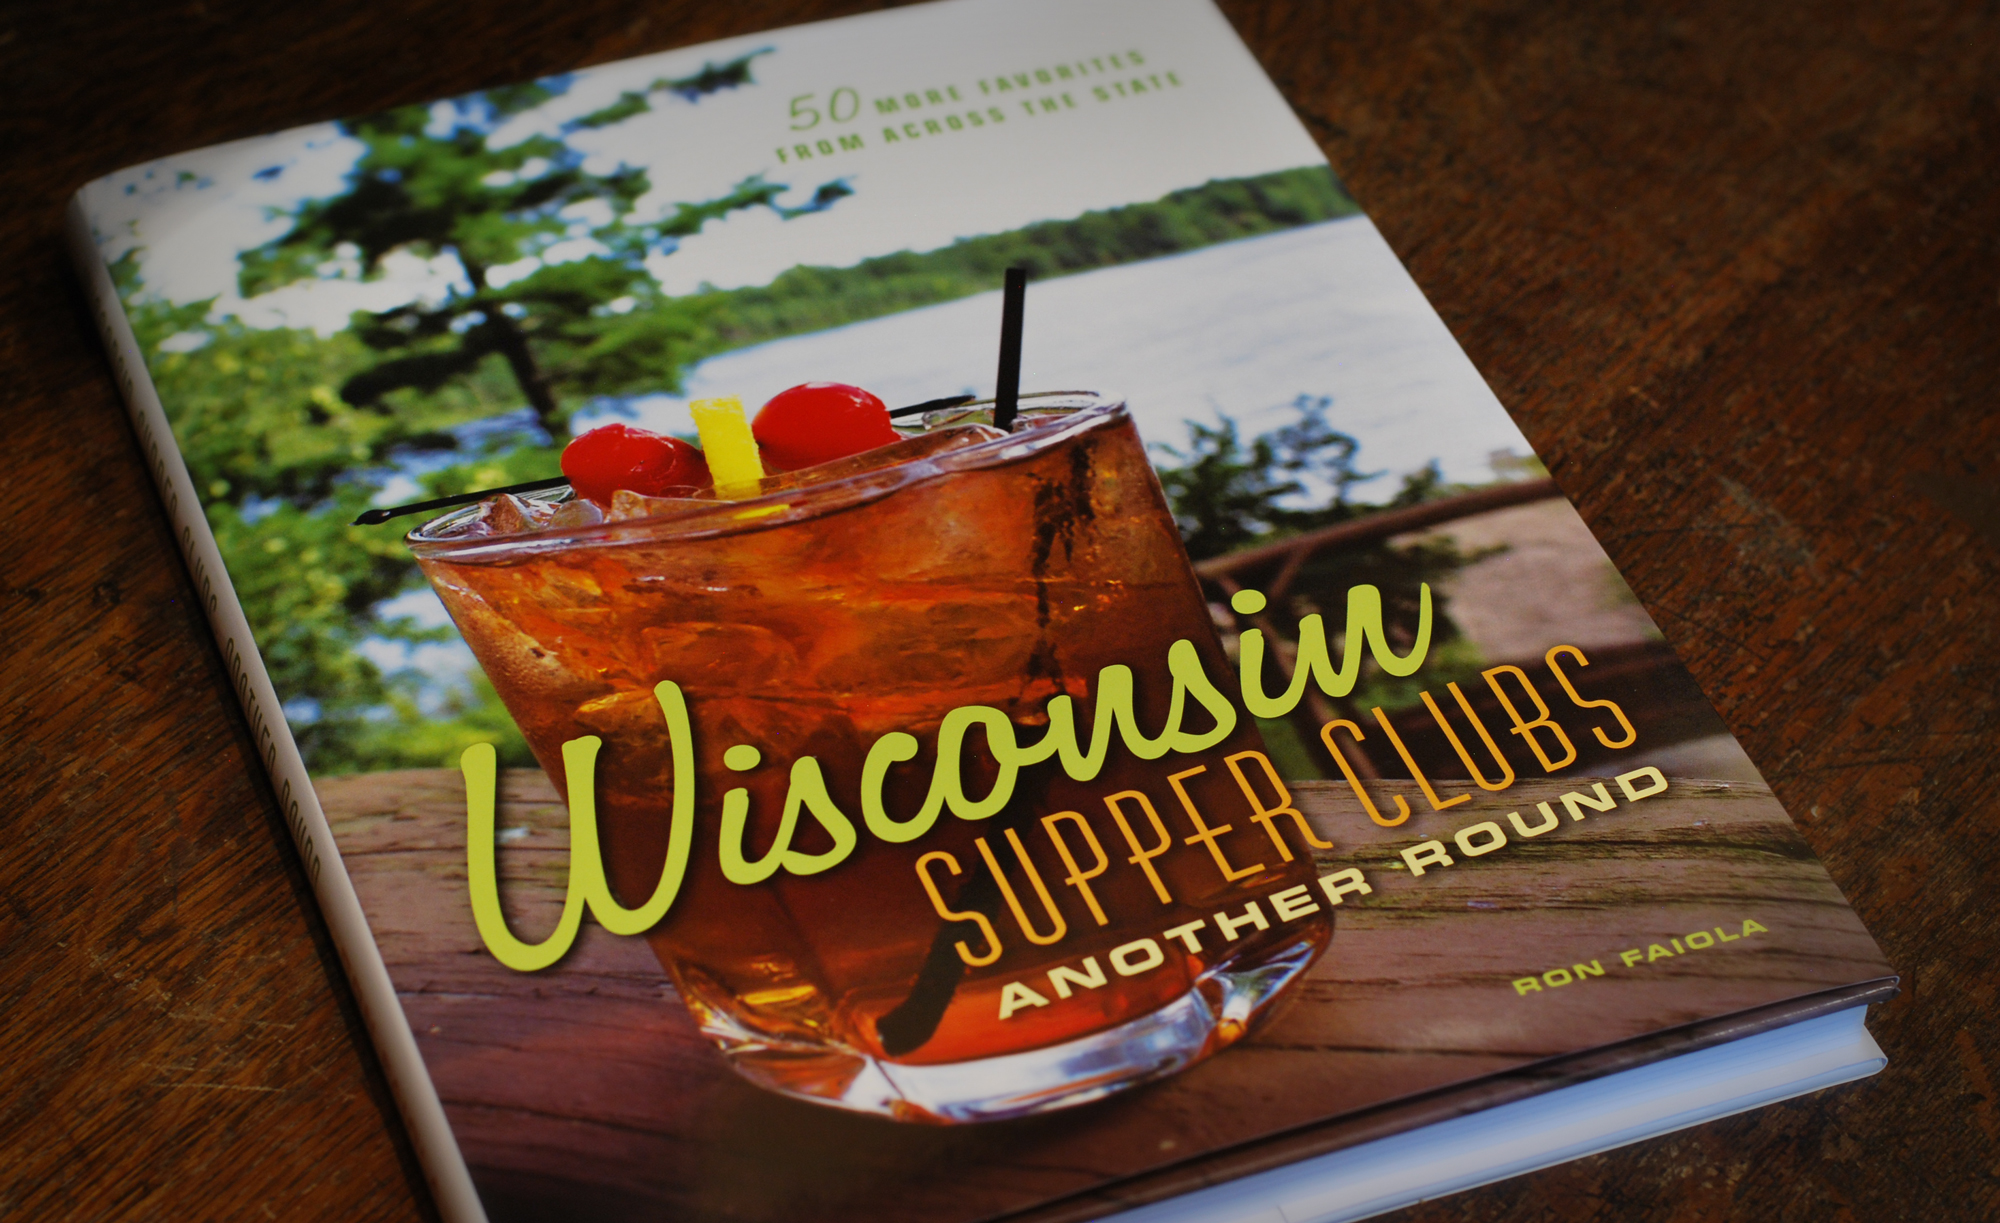 WIsconsin Supper Clubs, Another Round, by Ron Faiola